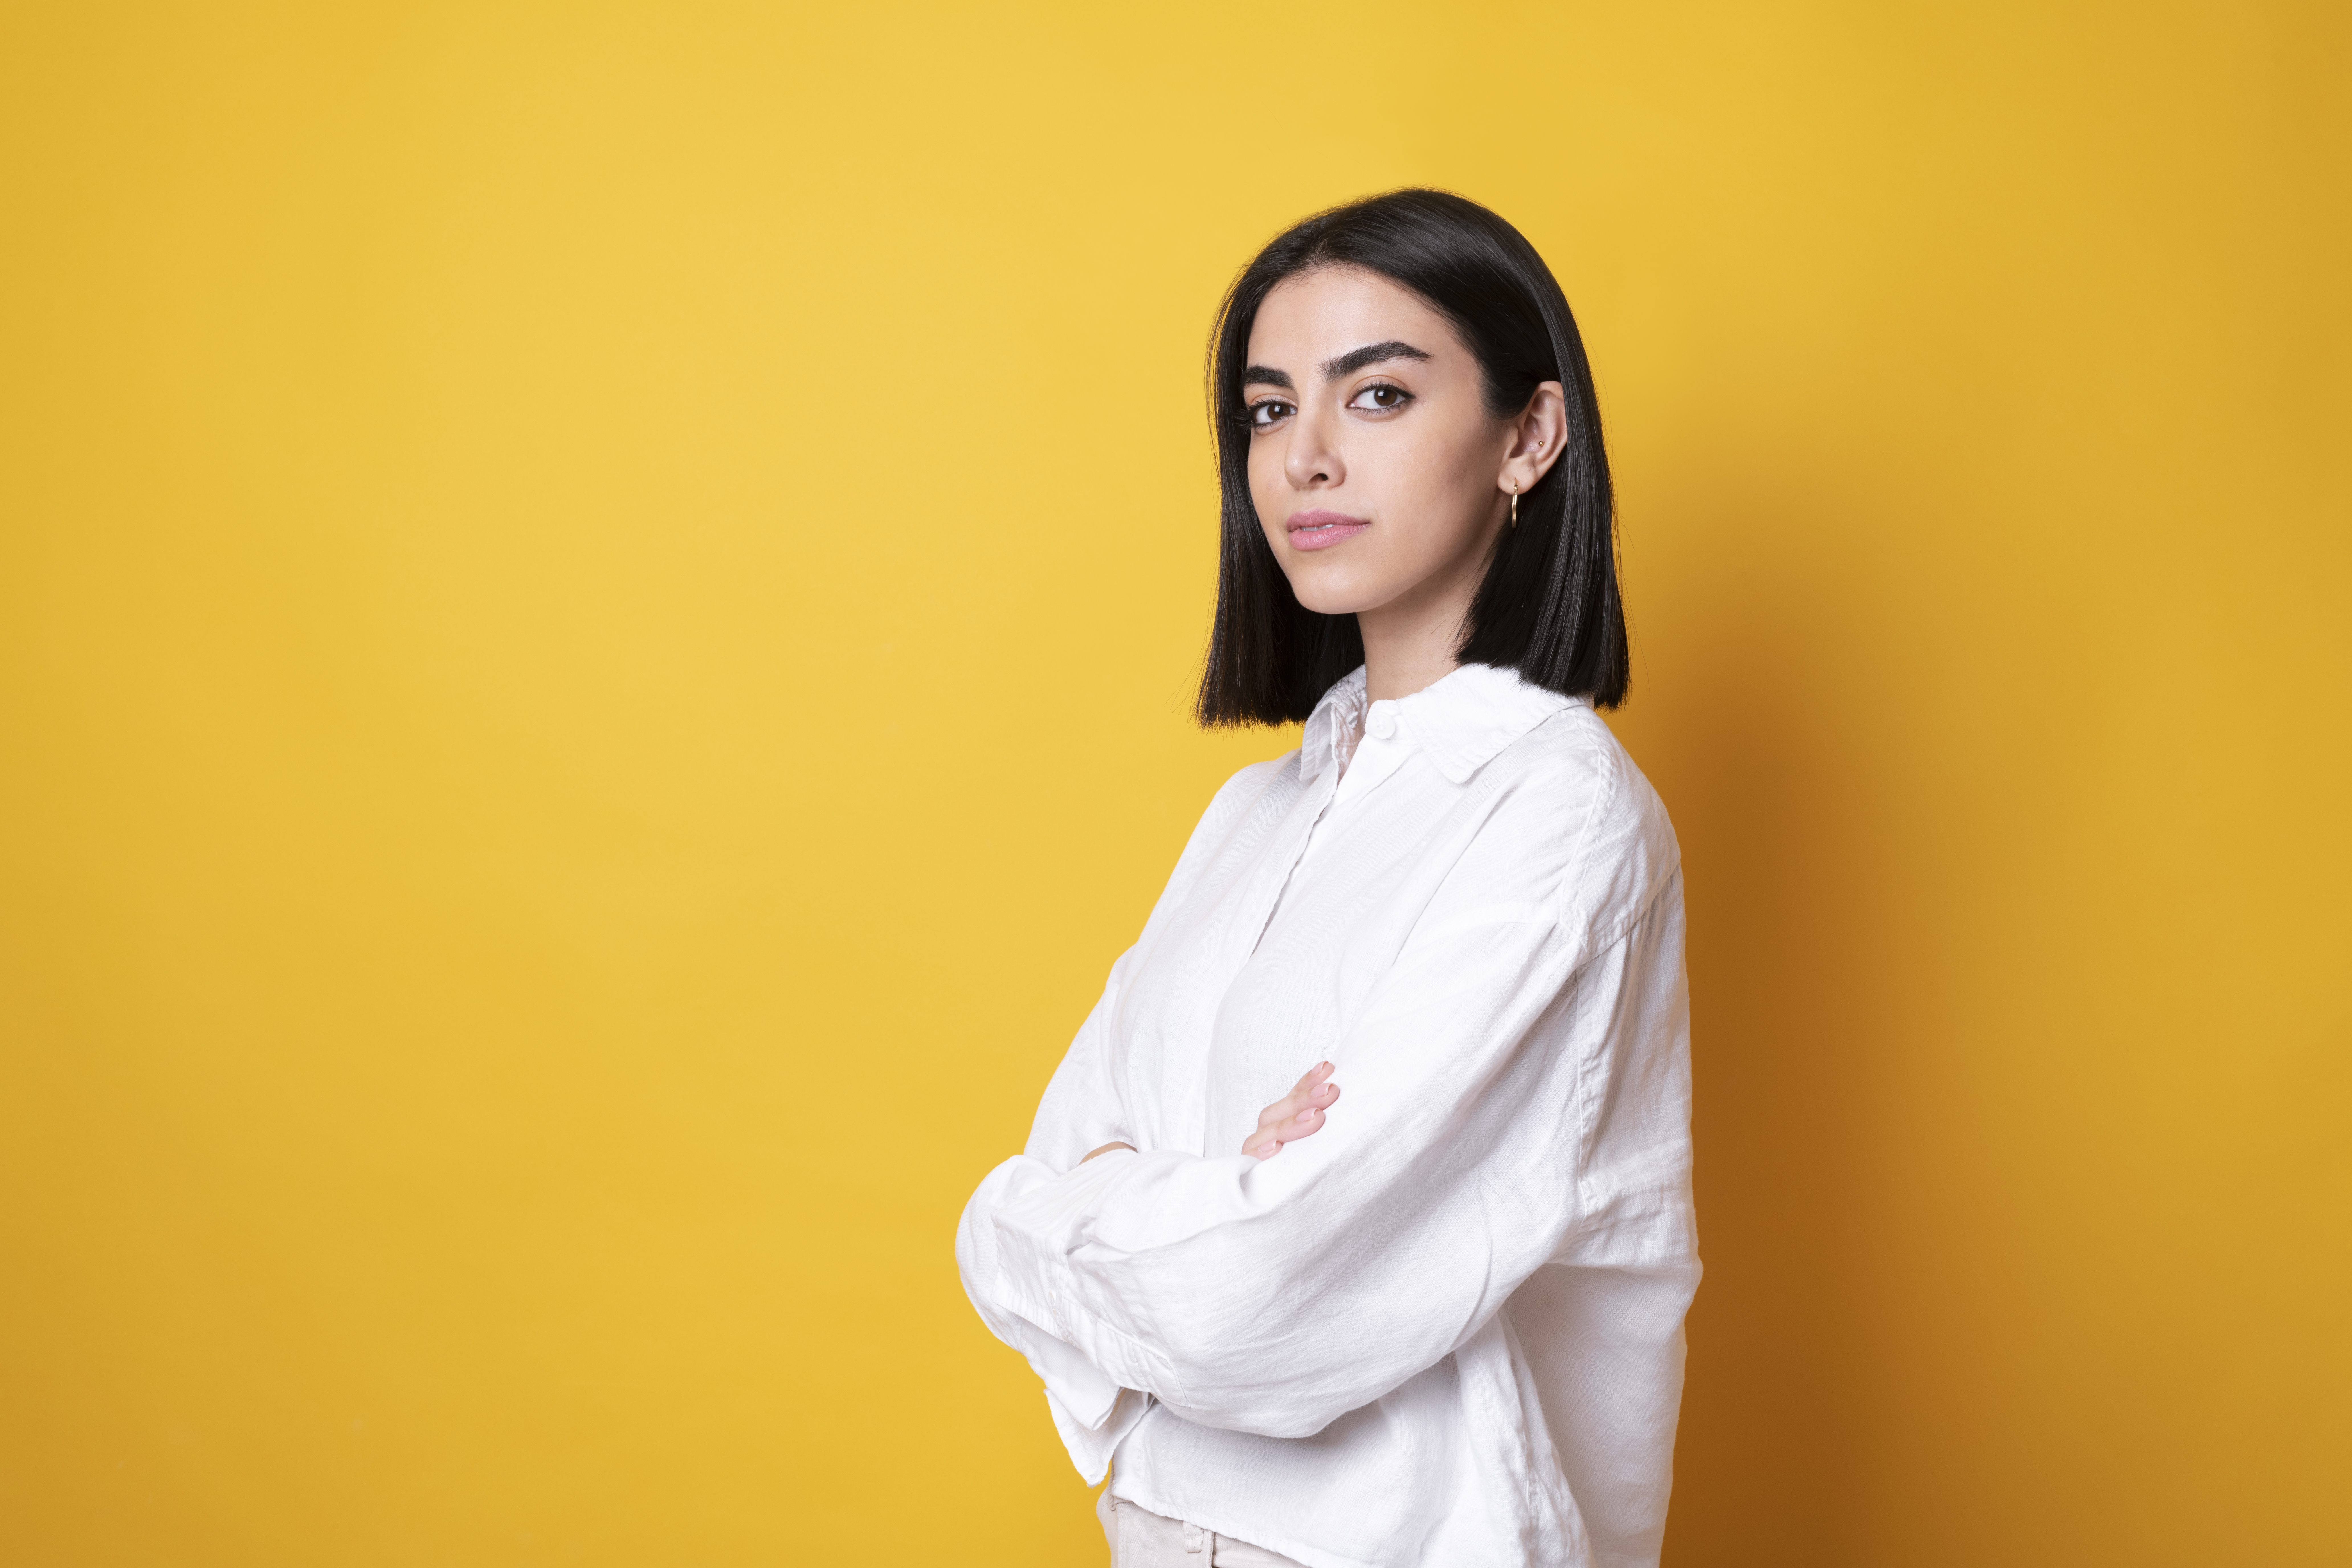 Young woman standing with arms crossed against yellow background | Source: Getty Images